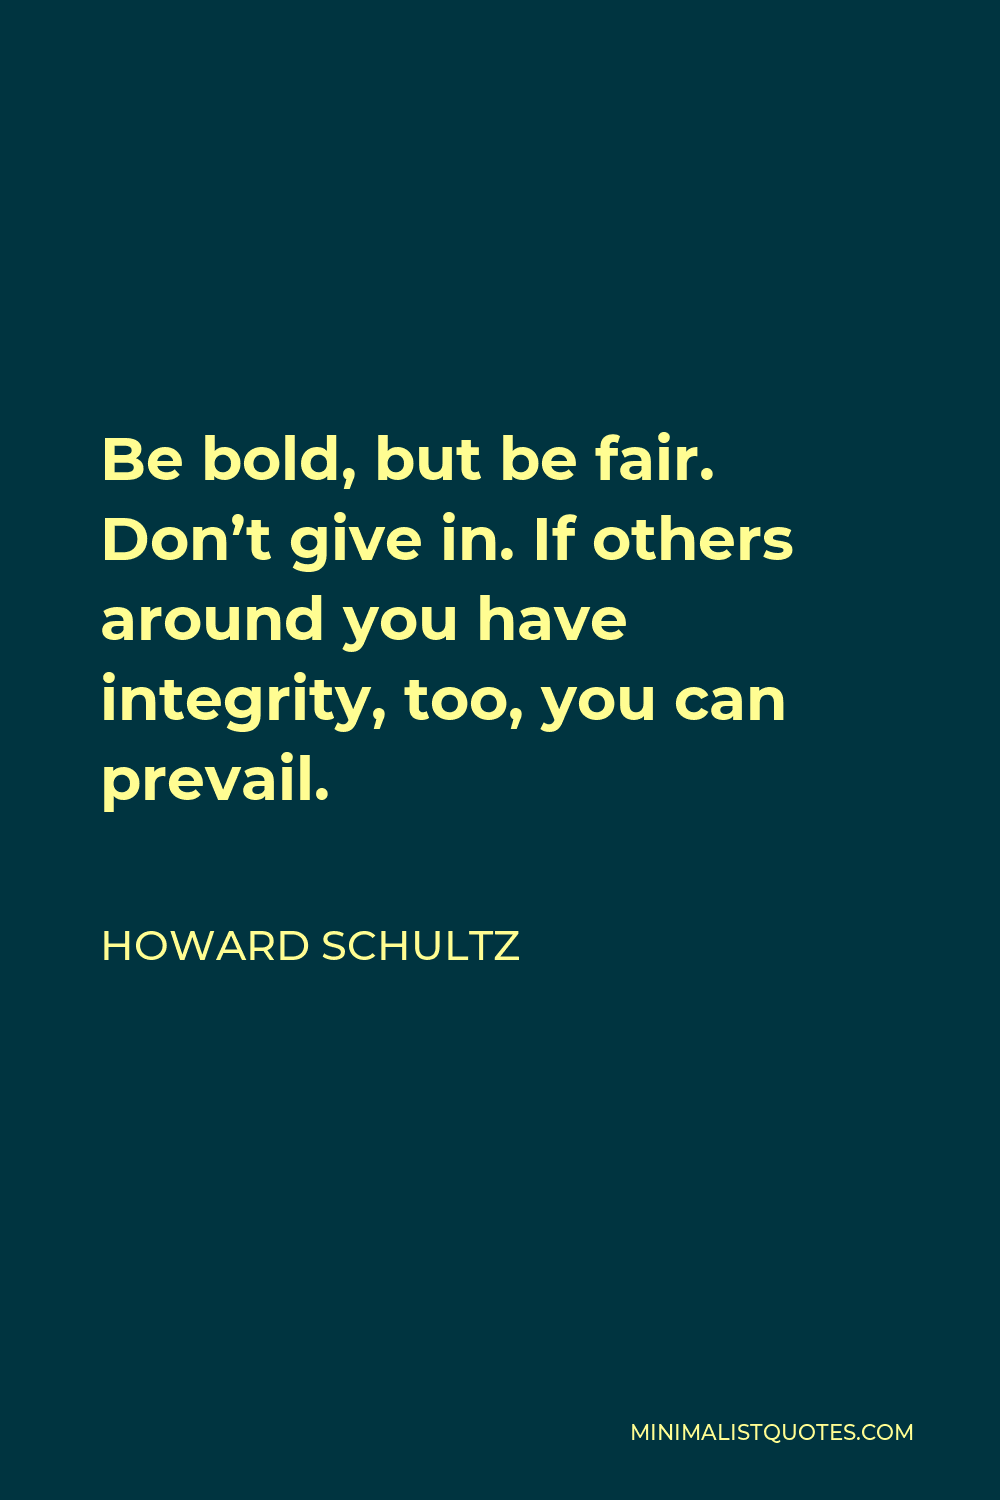 Howard Schultz Quote - Be bold, but be fair. Don’t give in. If others around you have integrity, too, you can prevail.